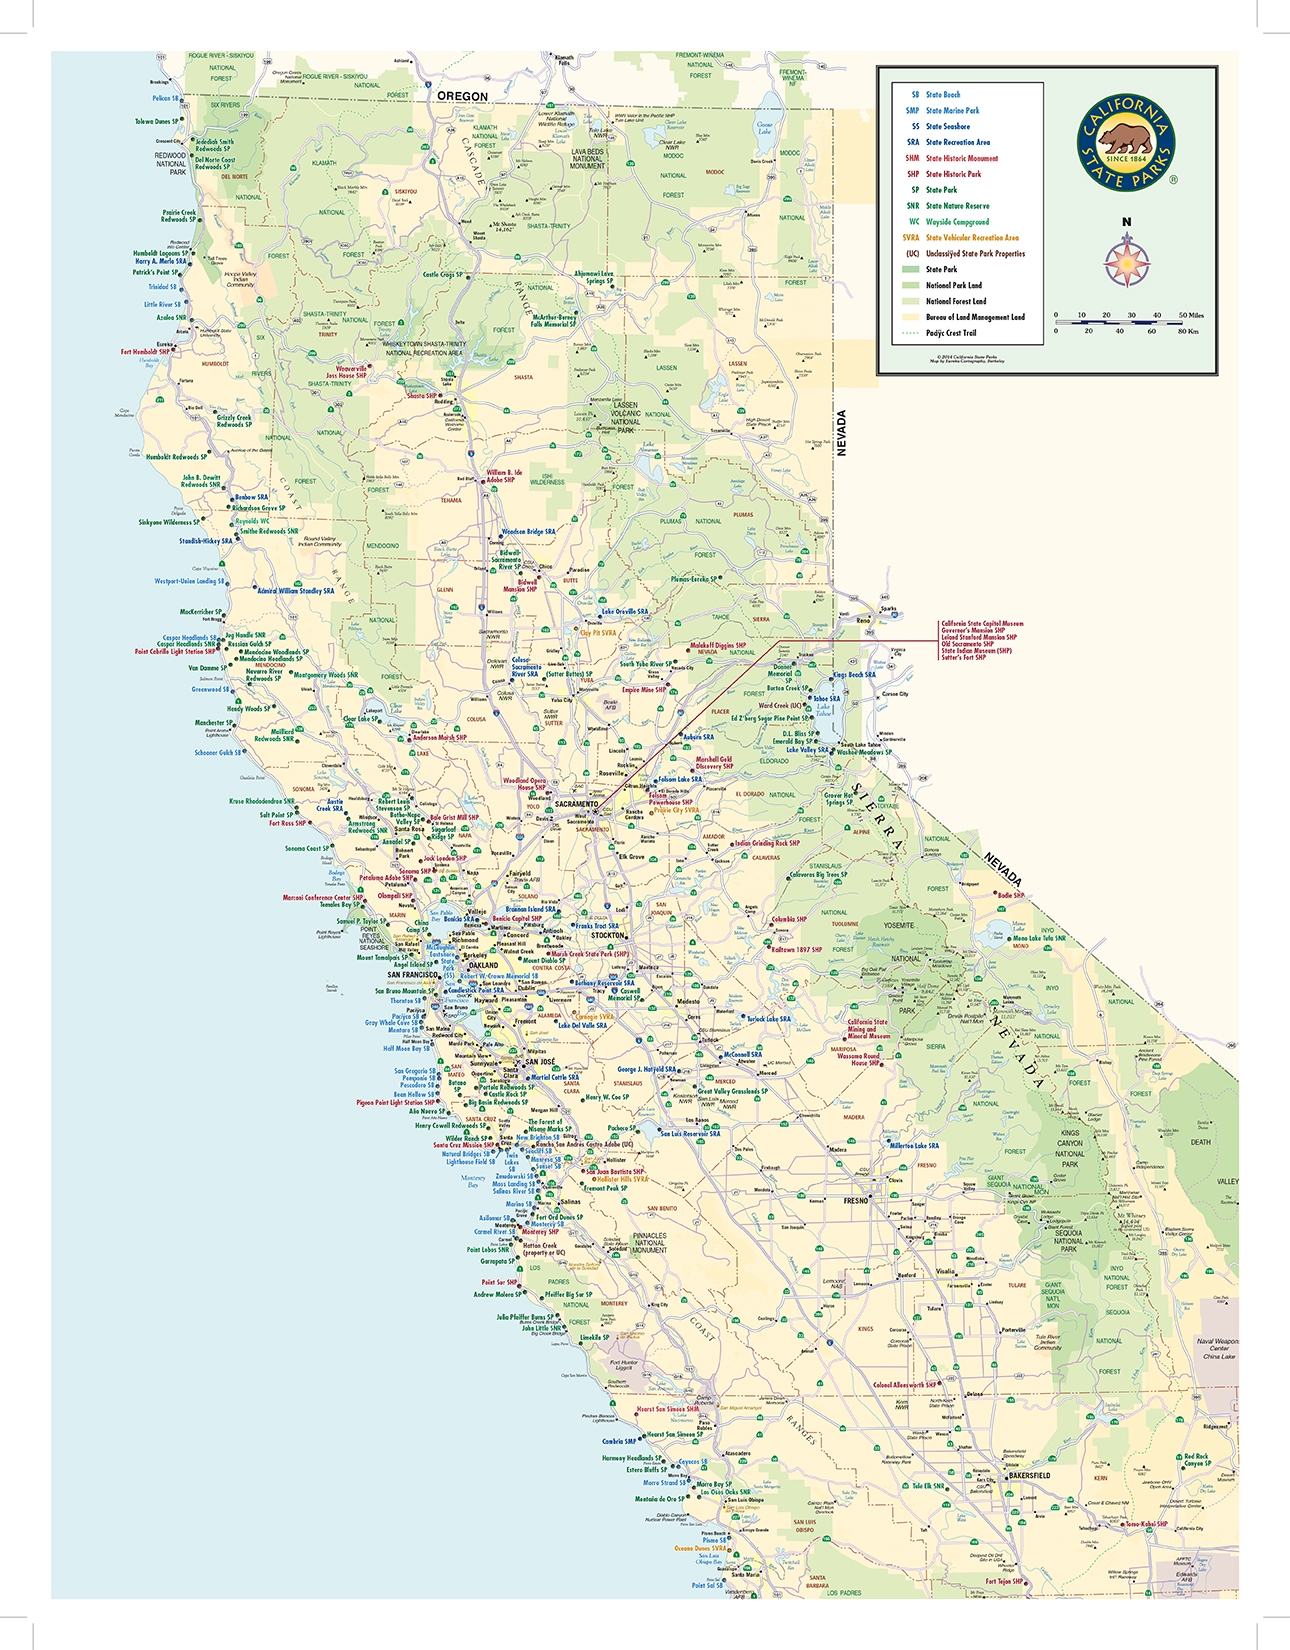 California State Parks Statewide Map | California Department of Parks ...